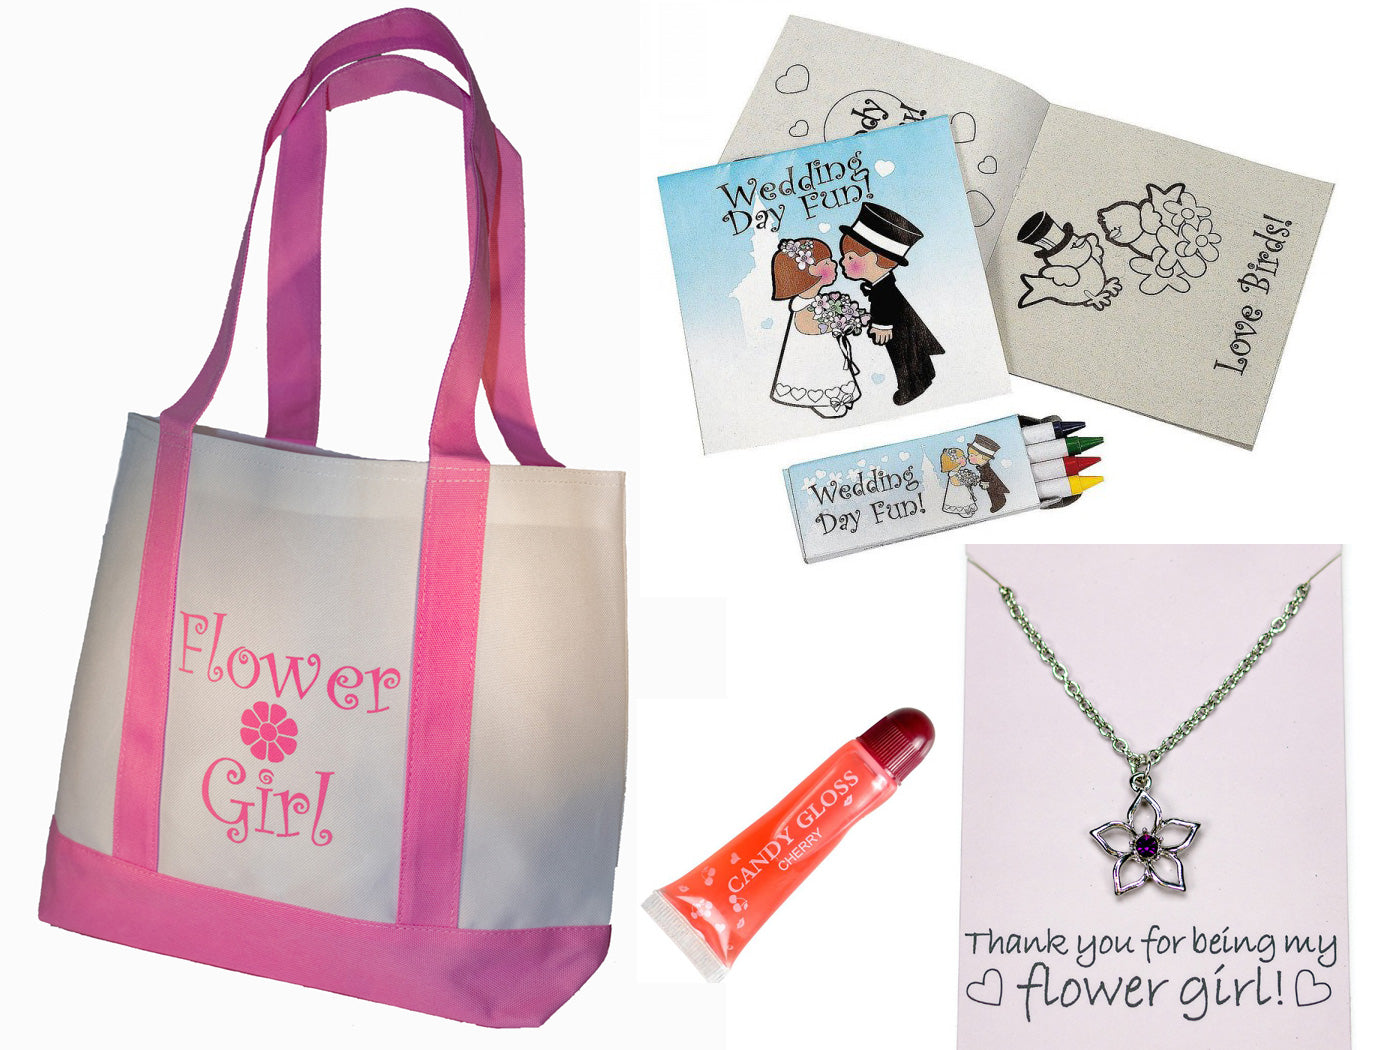 Flower Girl Gifts Set: Tote Bag, Metal Flower Girl Necklace, Lip Gloss, Wedding Day Kids Activity Kits